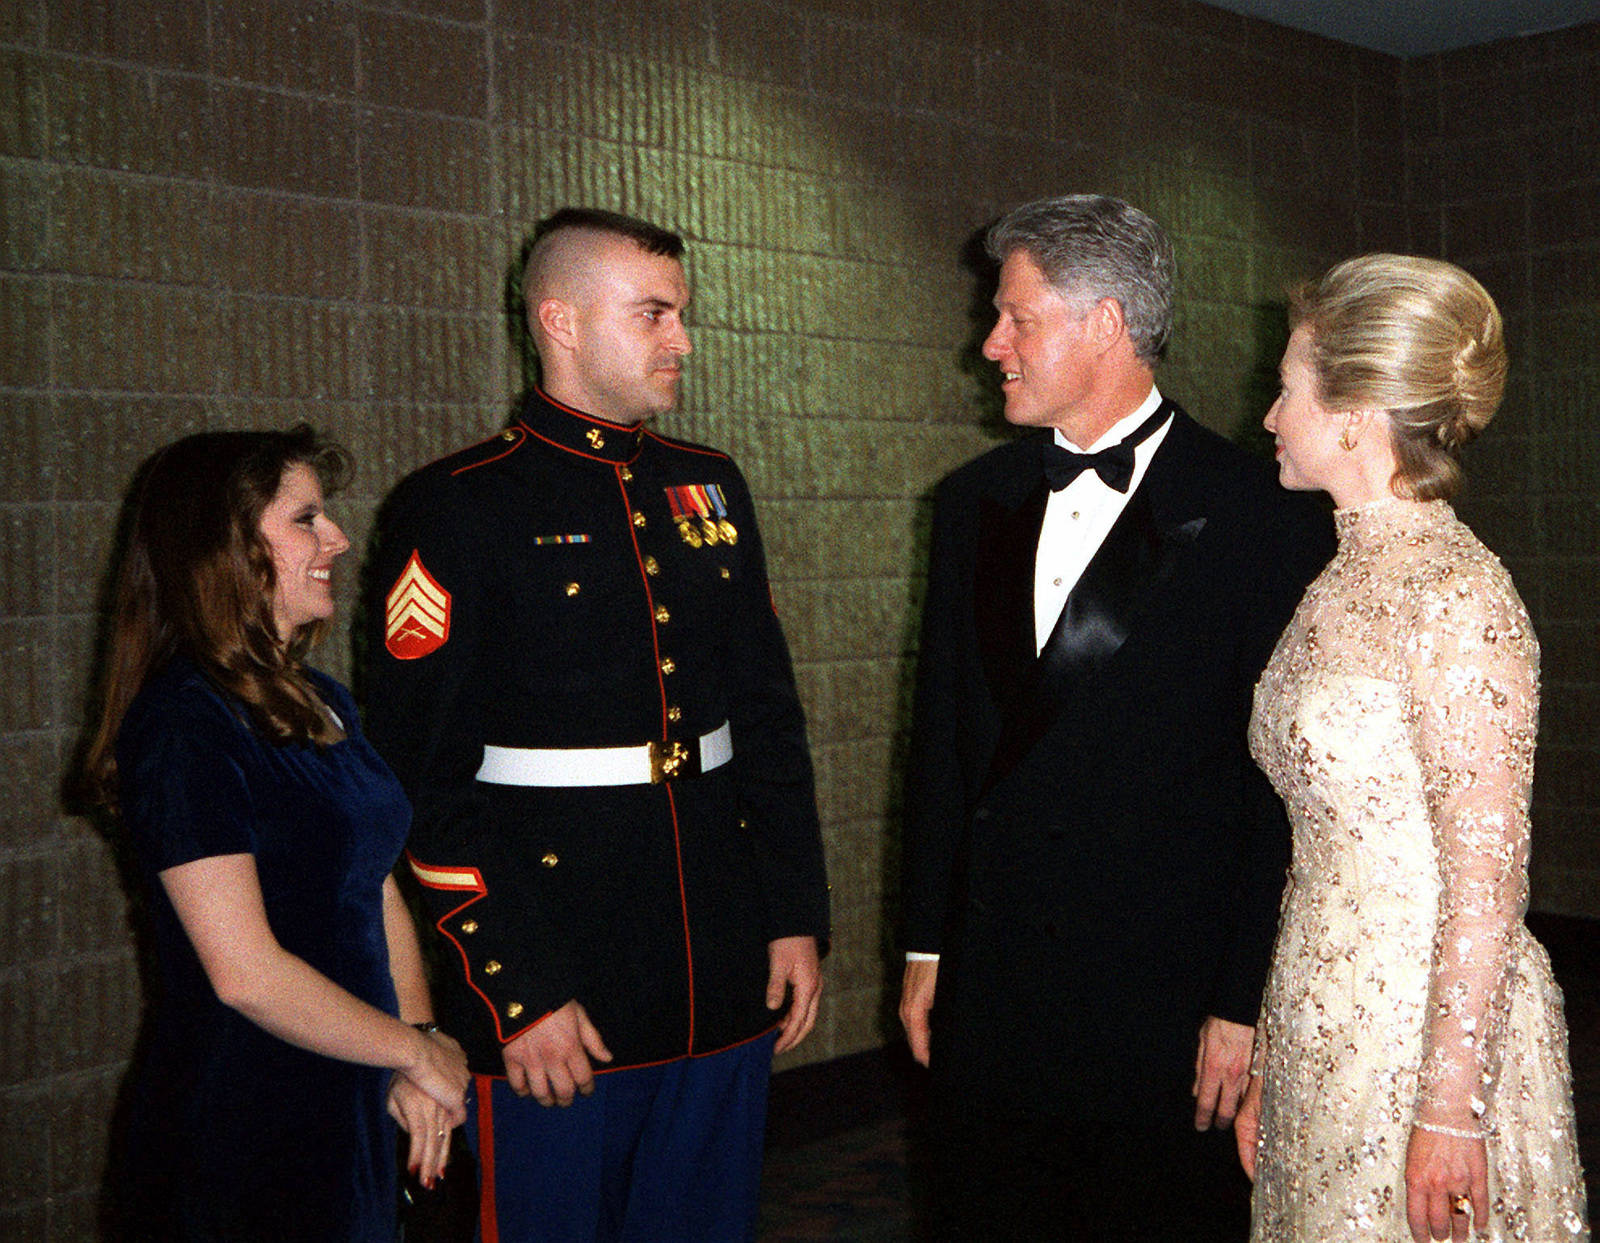 Former President Bill Clinton in a serious discussion with a military General. Wallpaper